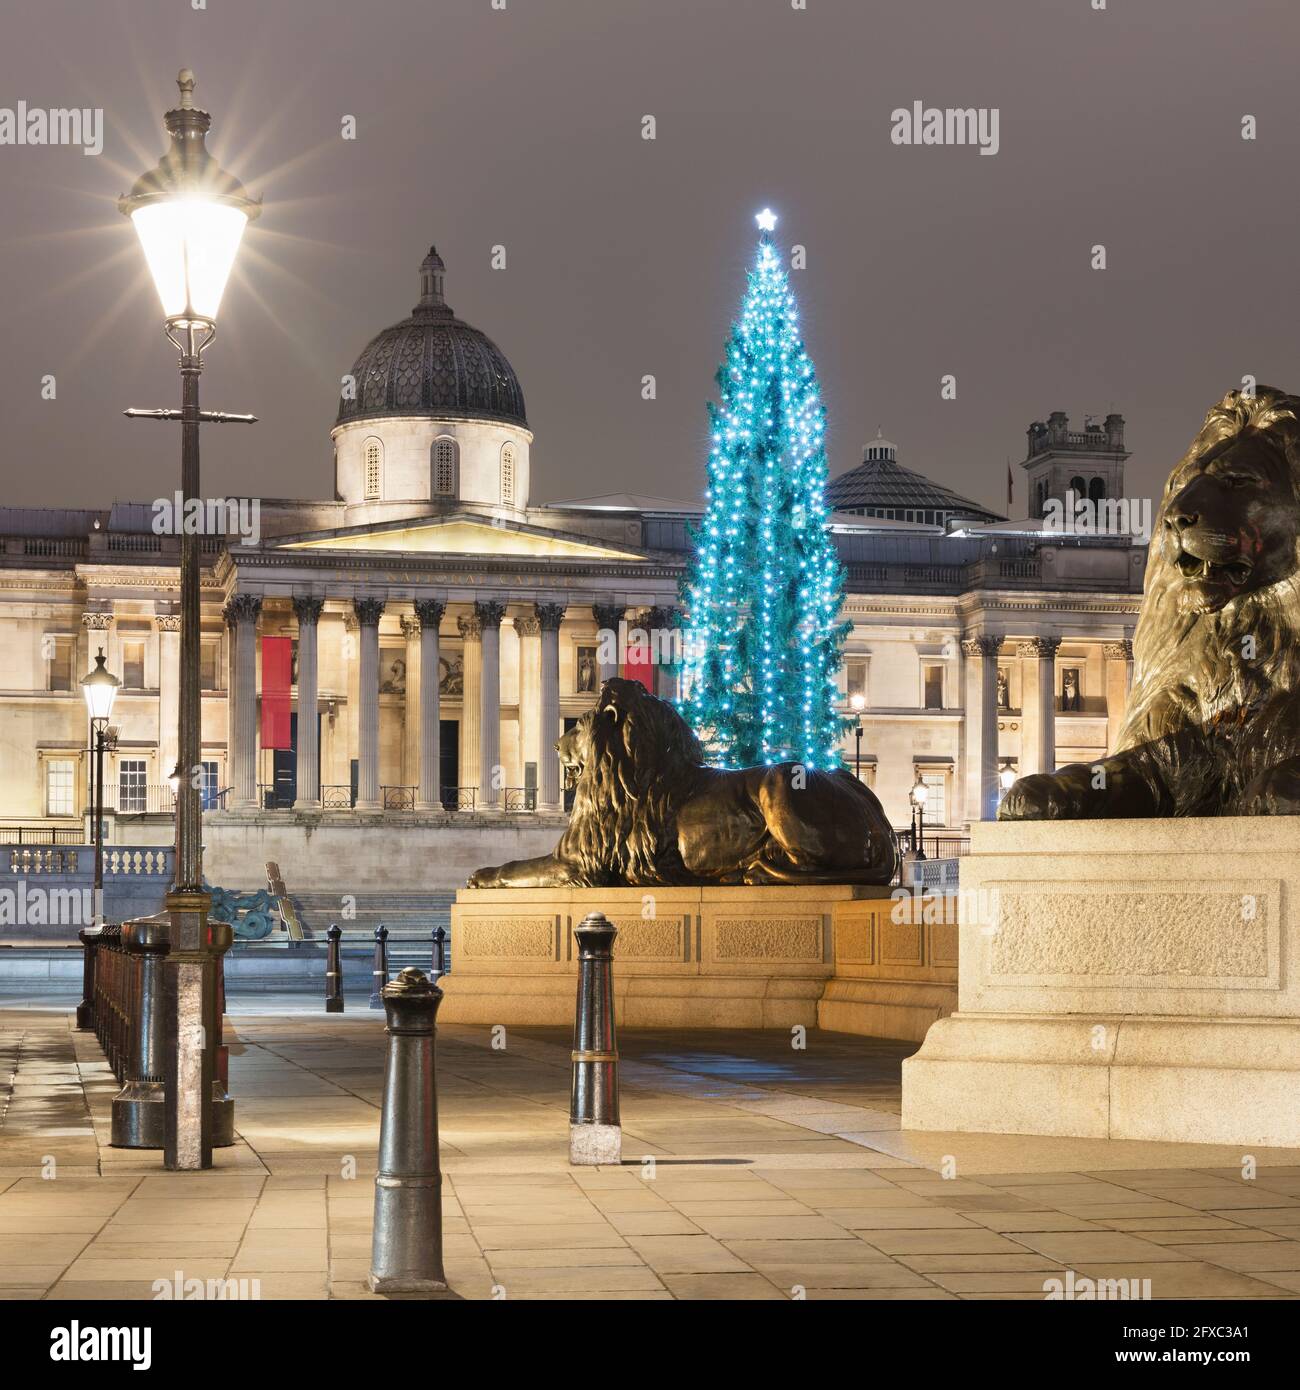 UK, England, London, Street light illuminating lion statues on Trafalgar Square at night with Christmas tree and National Gallery in background Stock Photo